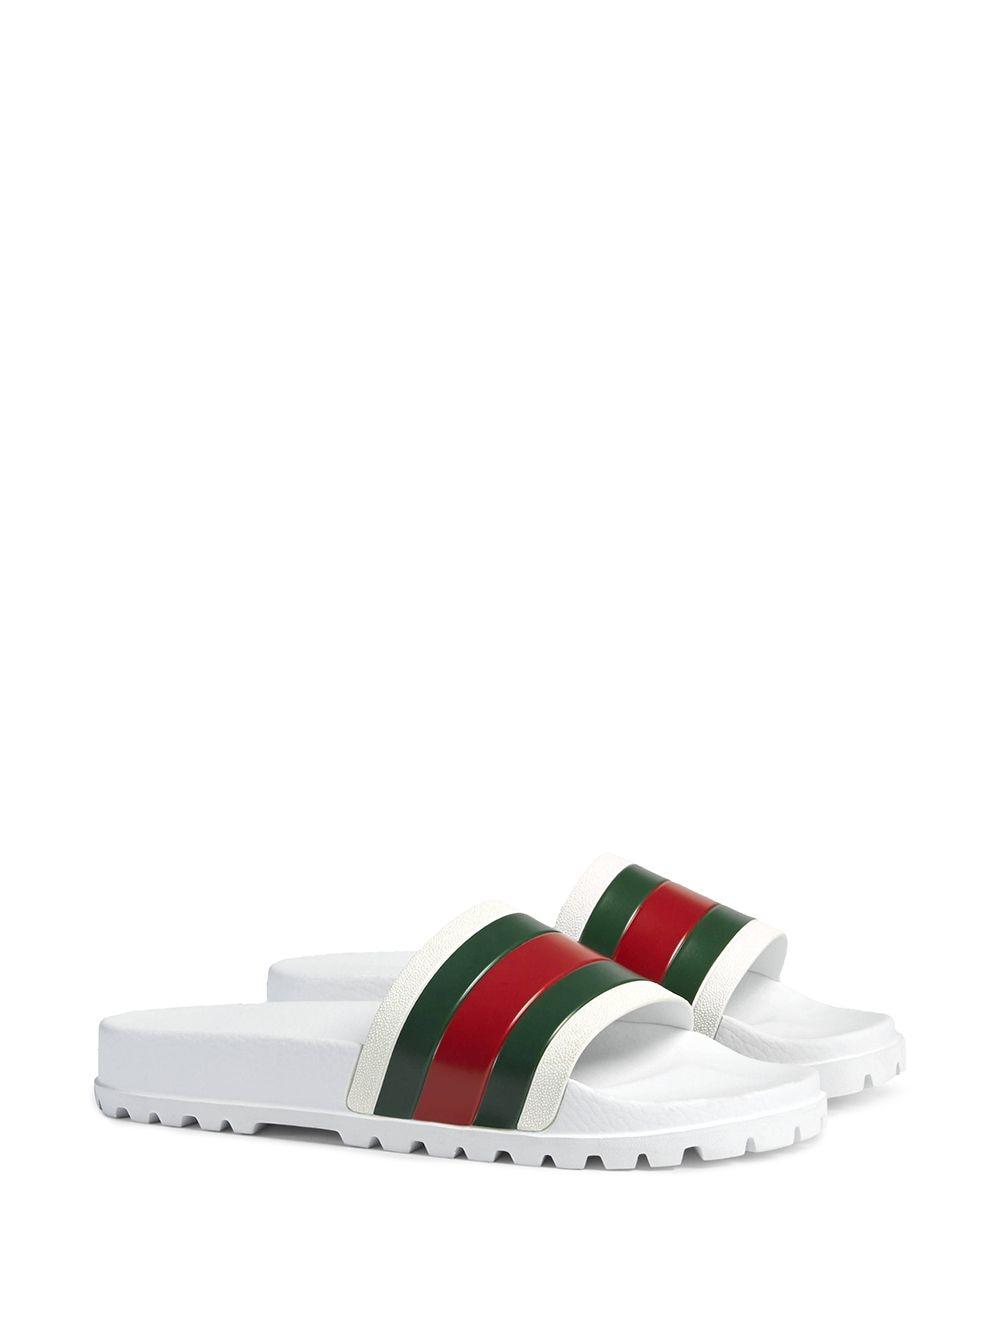 Gucci Rubber Web Detail Slides in -White (White) for Men - Save 20% - Lyst